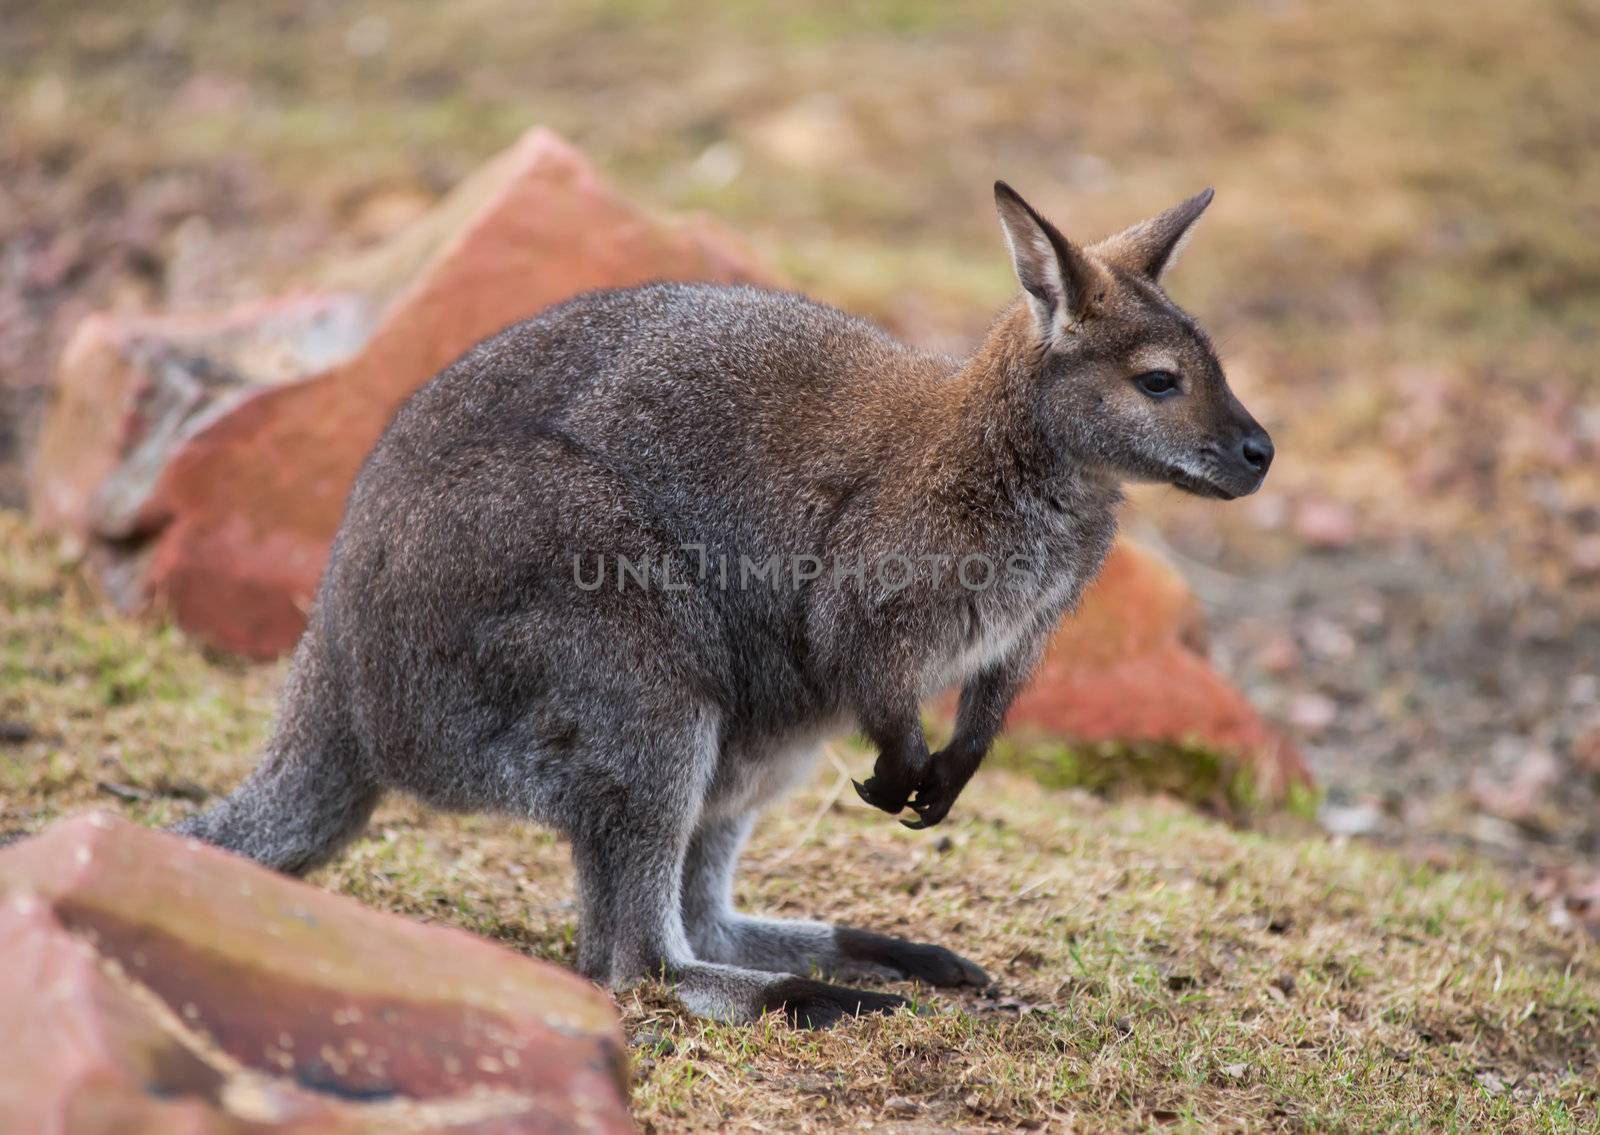 Wallaby: wildlife and animals of Australia by Arsgera